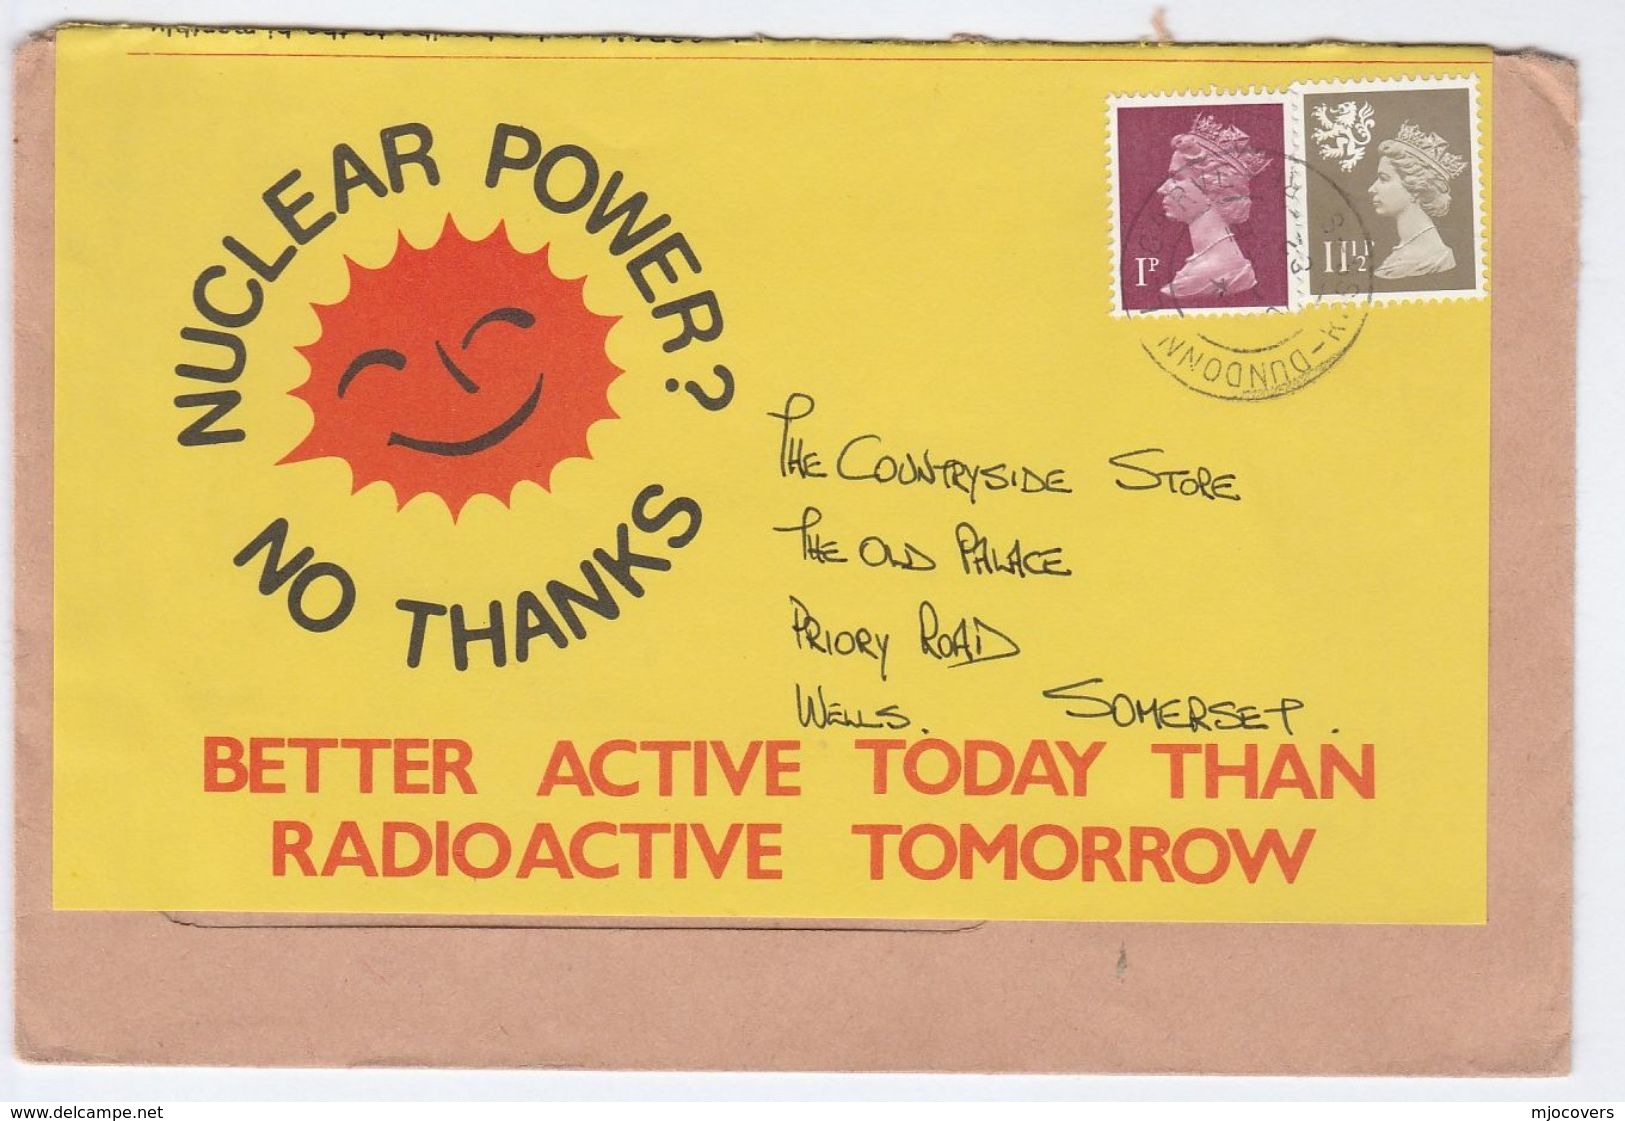 1982 Dundonnell NUCLEAR POWER NO THANKS COVER Re-use Label BETTER ACTIVE TODAY THAN RADIOACTIVE Atomic Energy Gb Stamps - Atomenergie